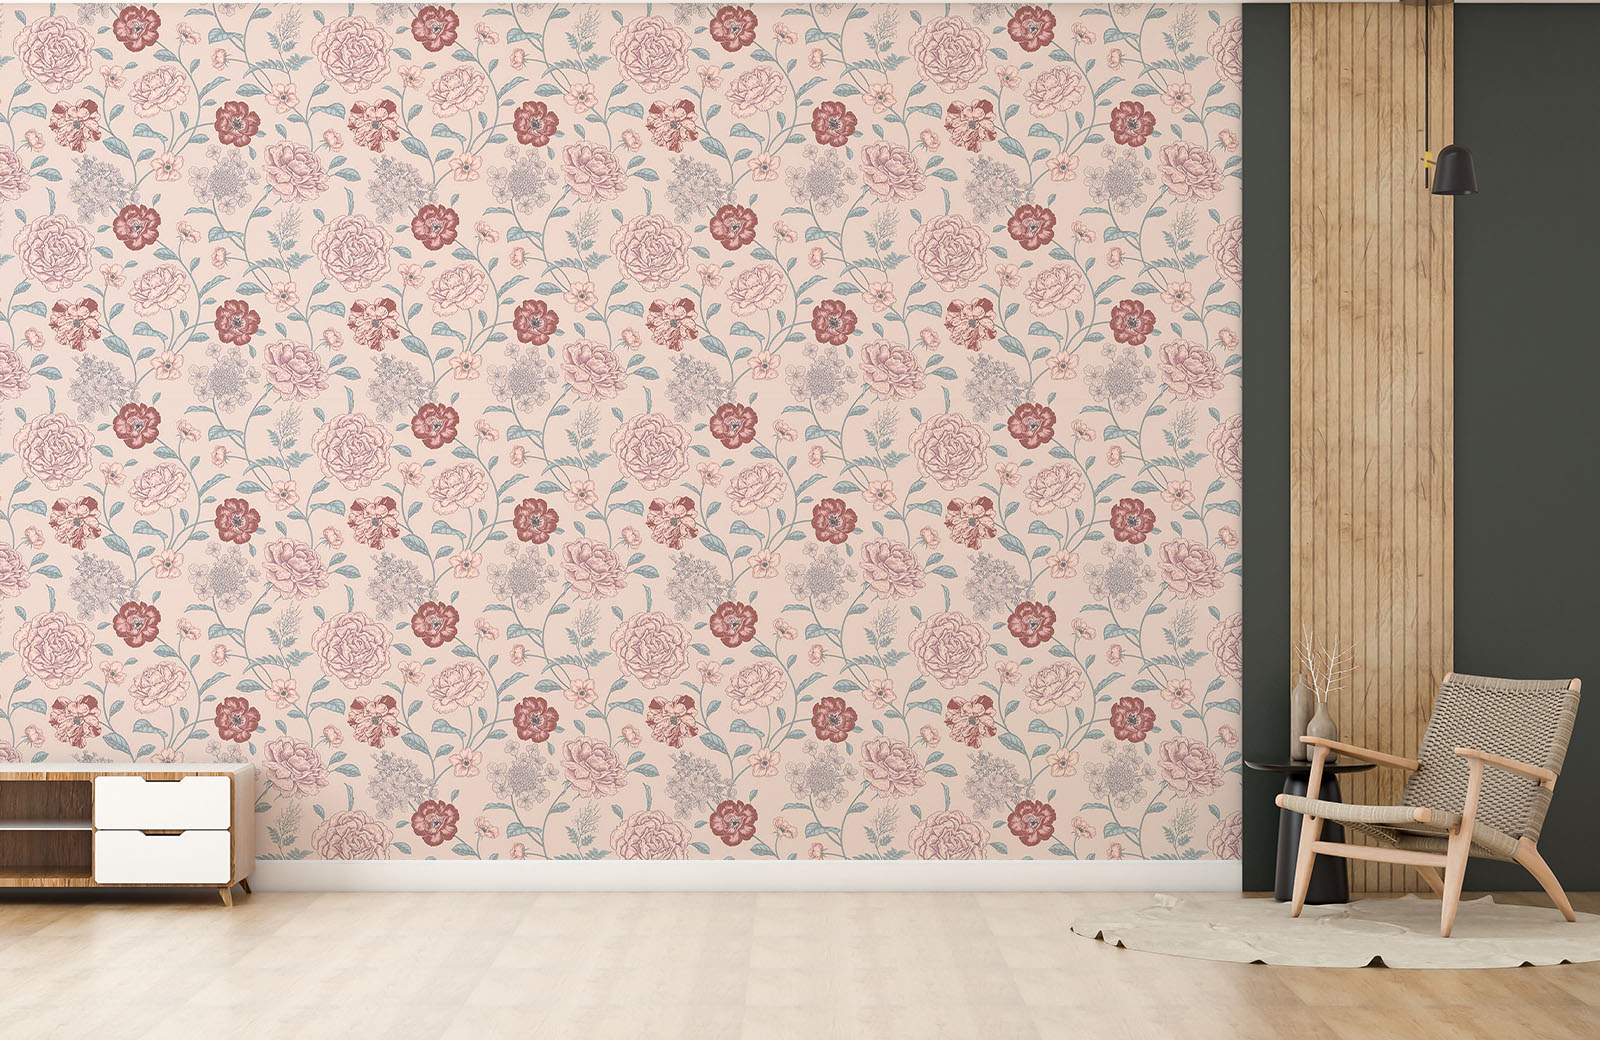 large-and-small-flowers-with-leaves-wallpaper-with-chair